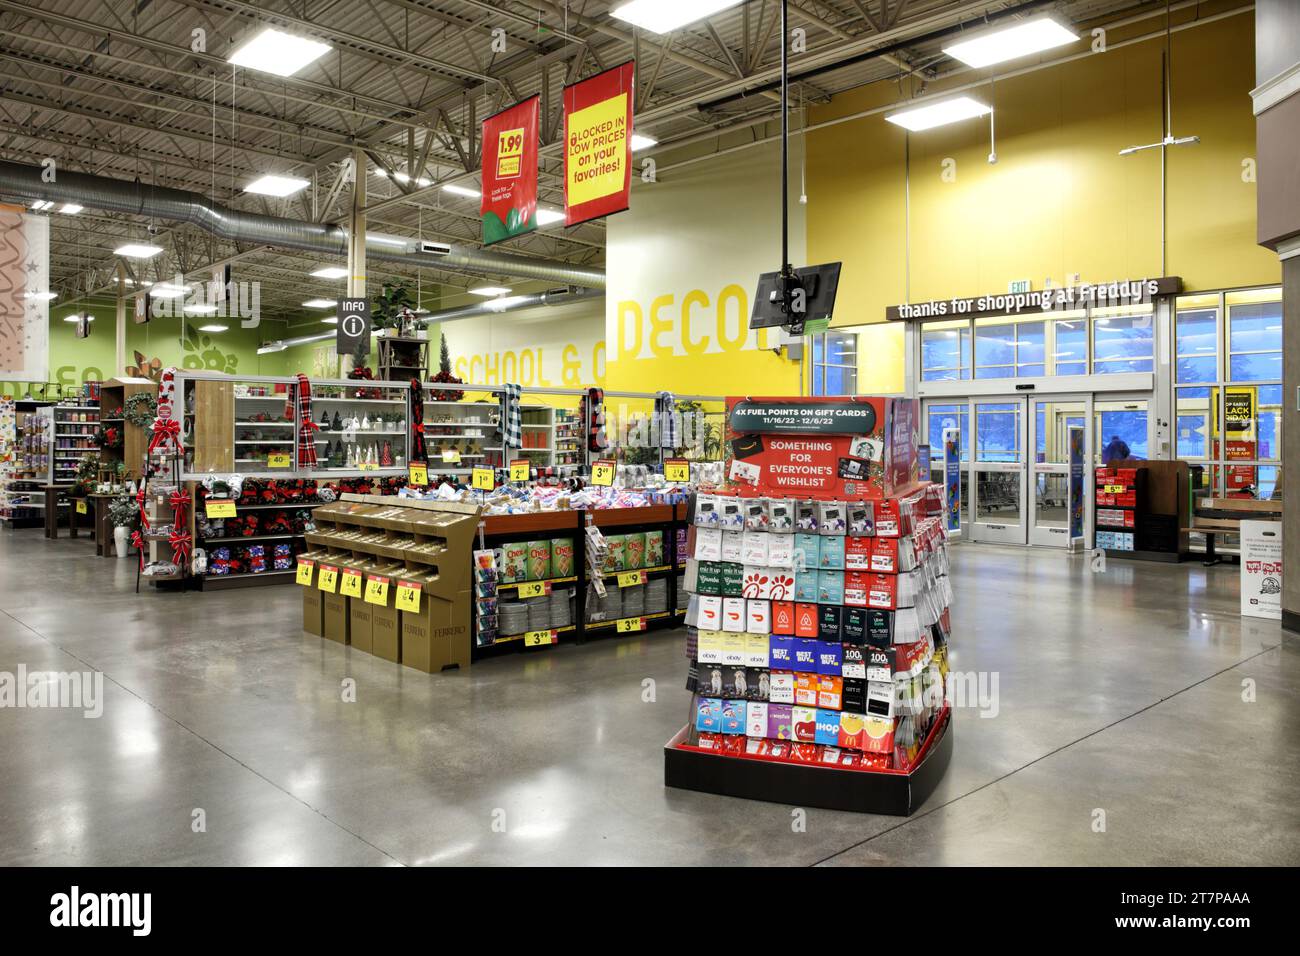 https://c8.alamy.com/comp/2T7PAAA/an-interior-view-of-a-modern-super-grocery-store-2T7PAAA.jpg